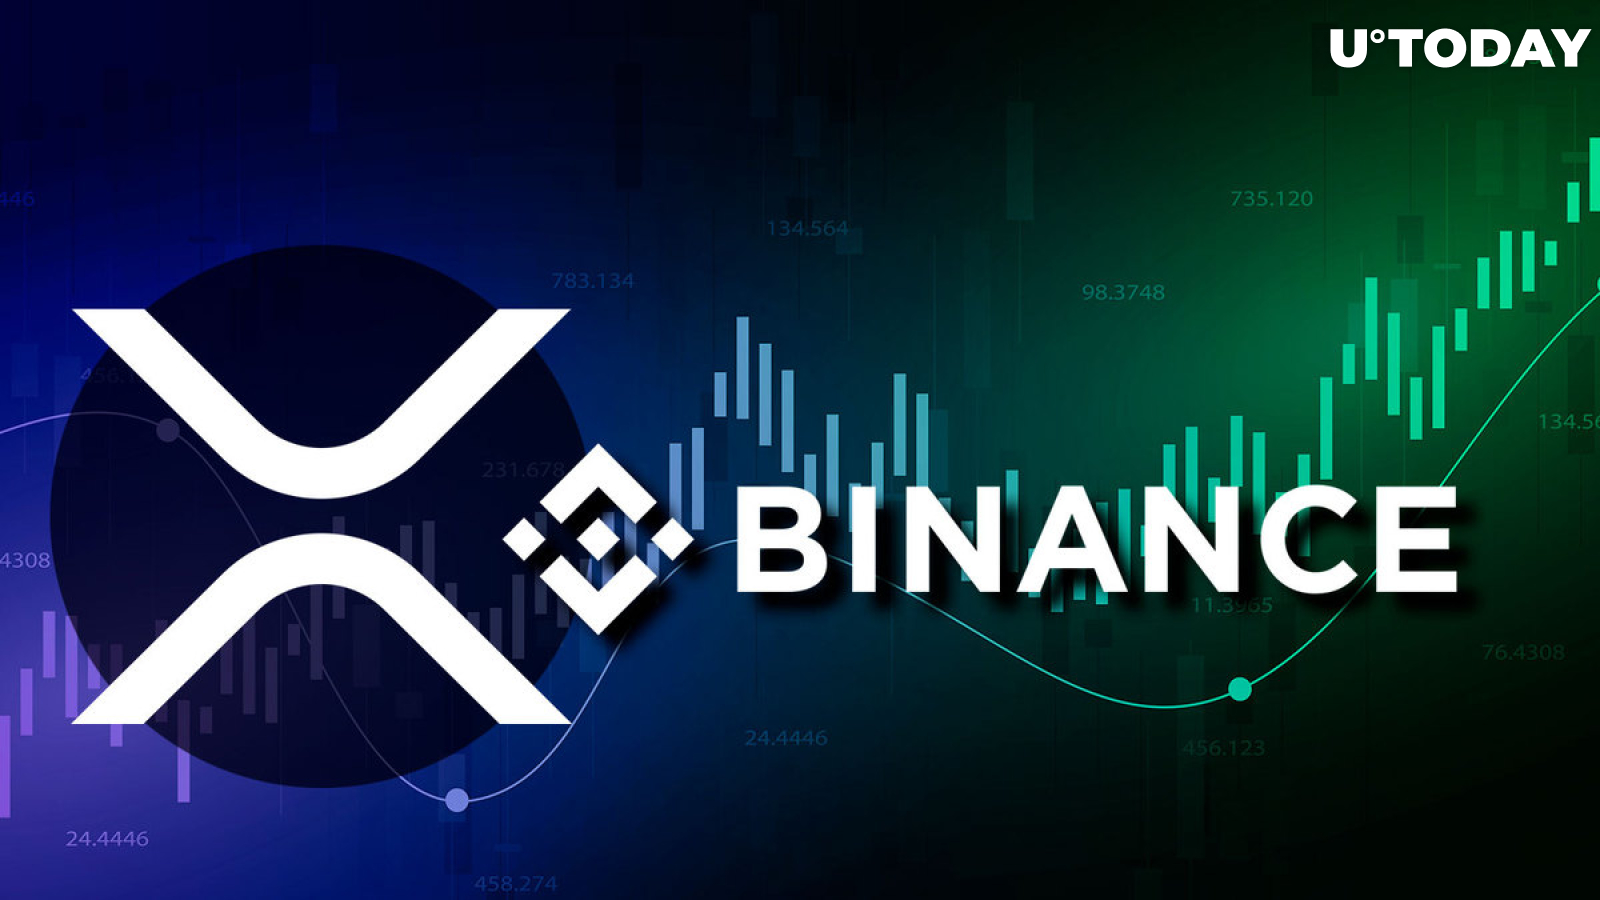 Massive XRP Shifted to Binance as Price Trades in Green: Details